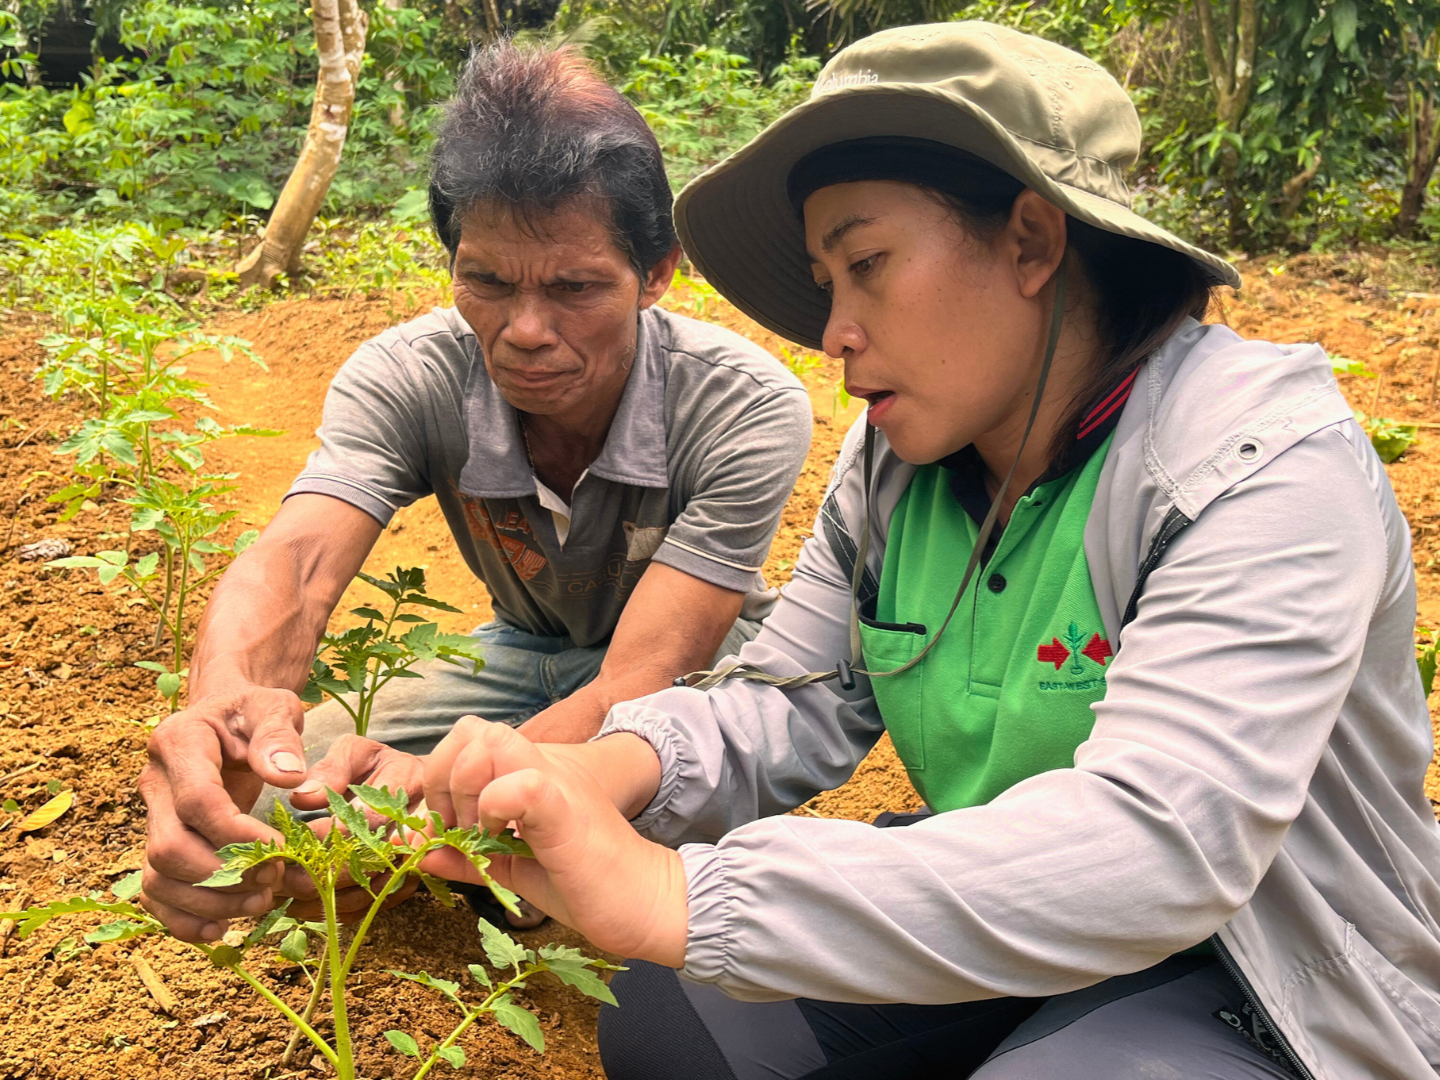 An EWS-KT staff member and a farmer inspect a young plant.